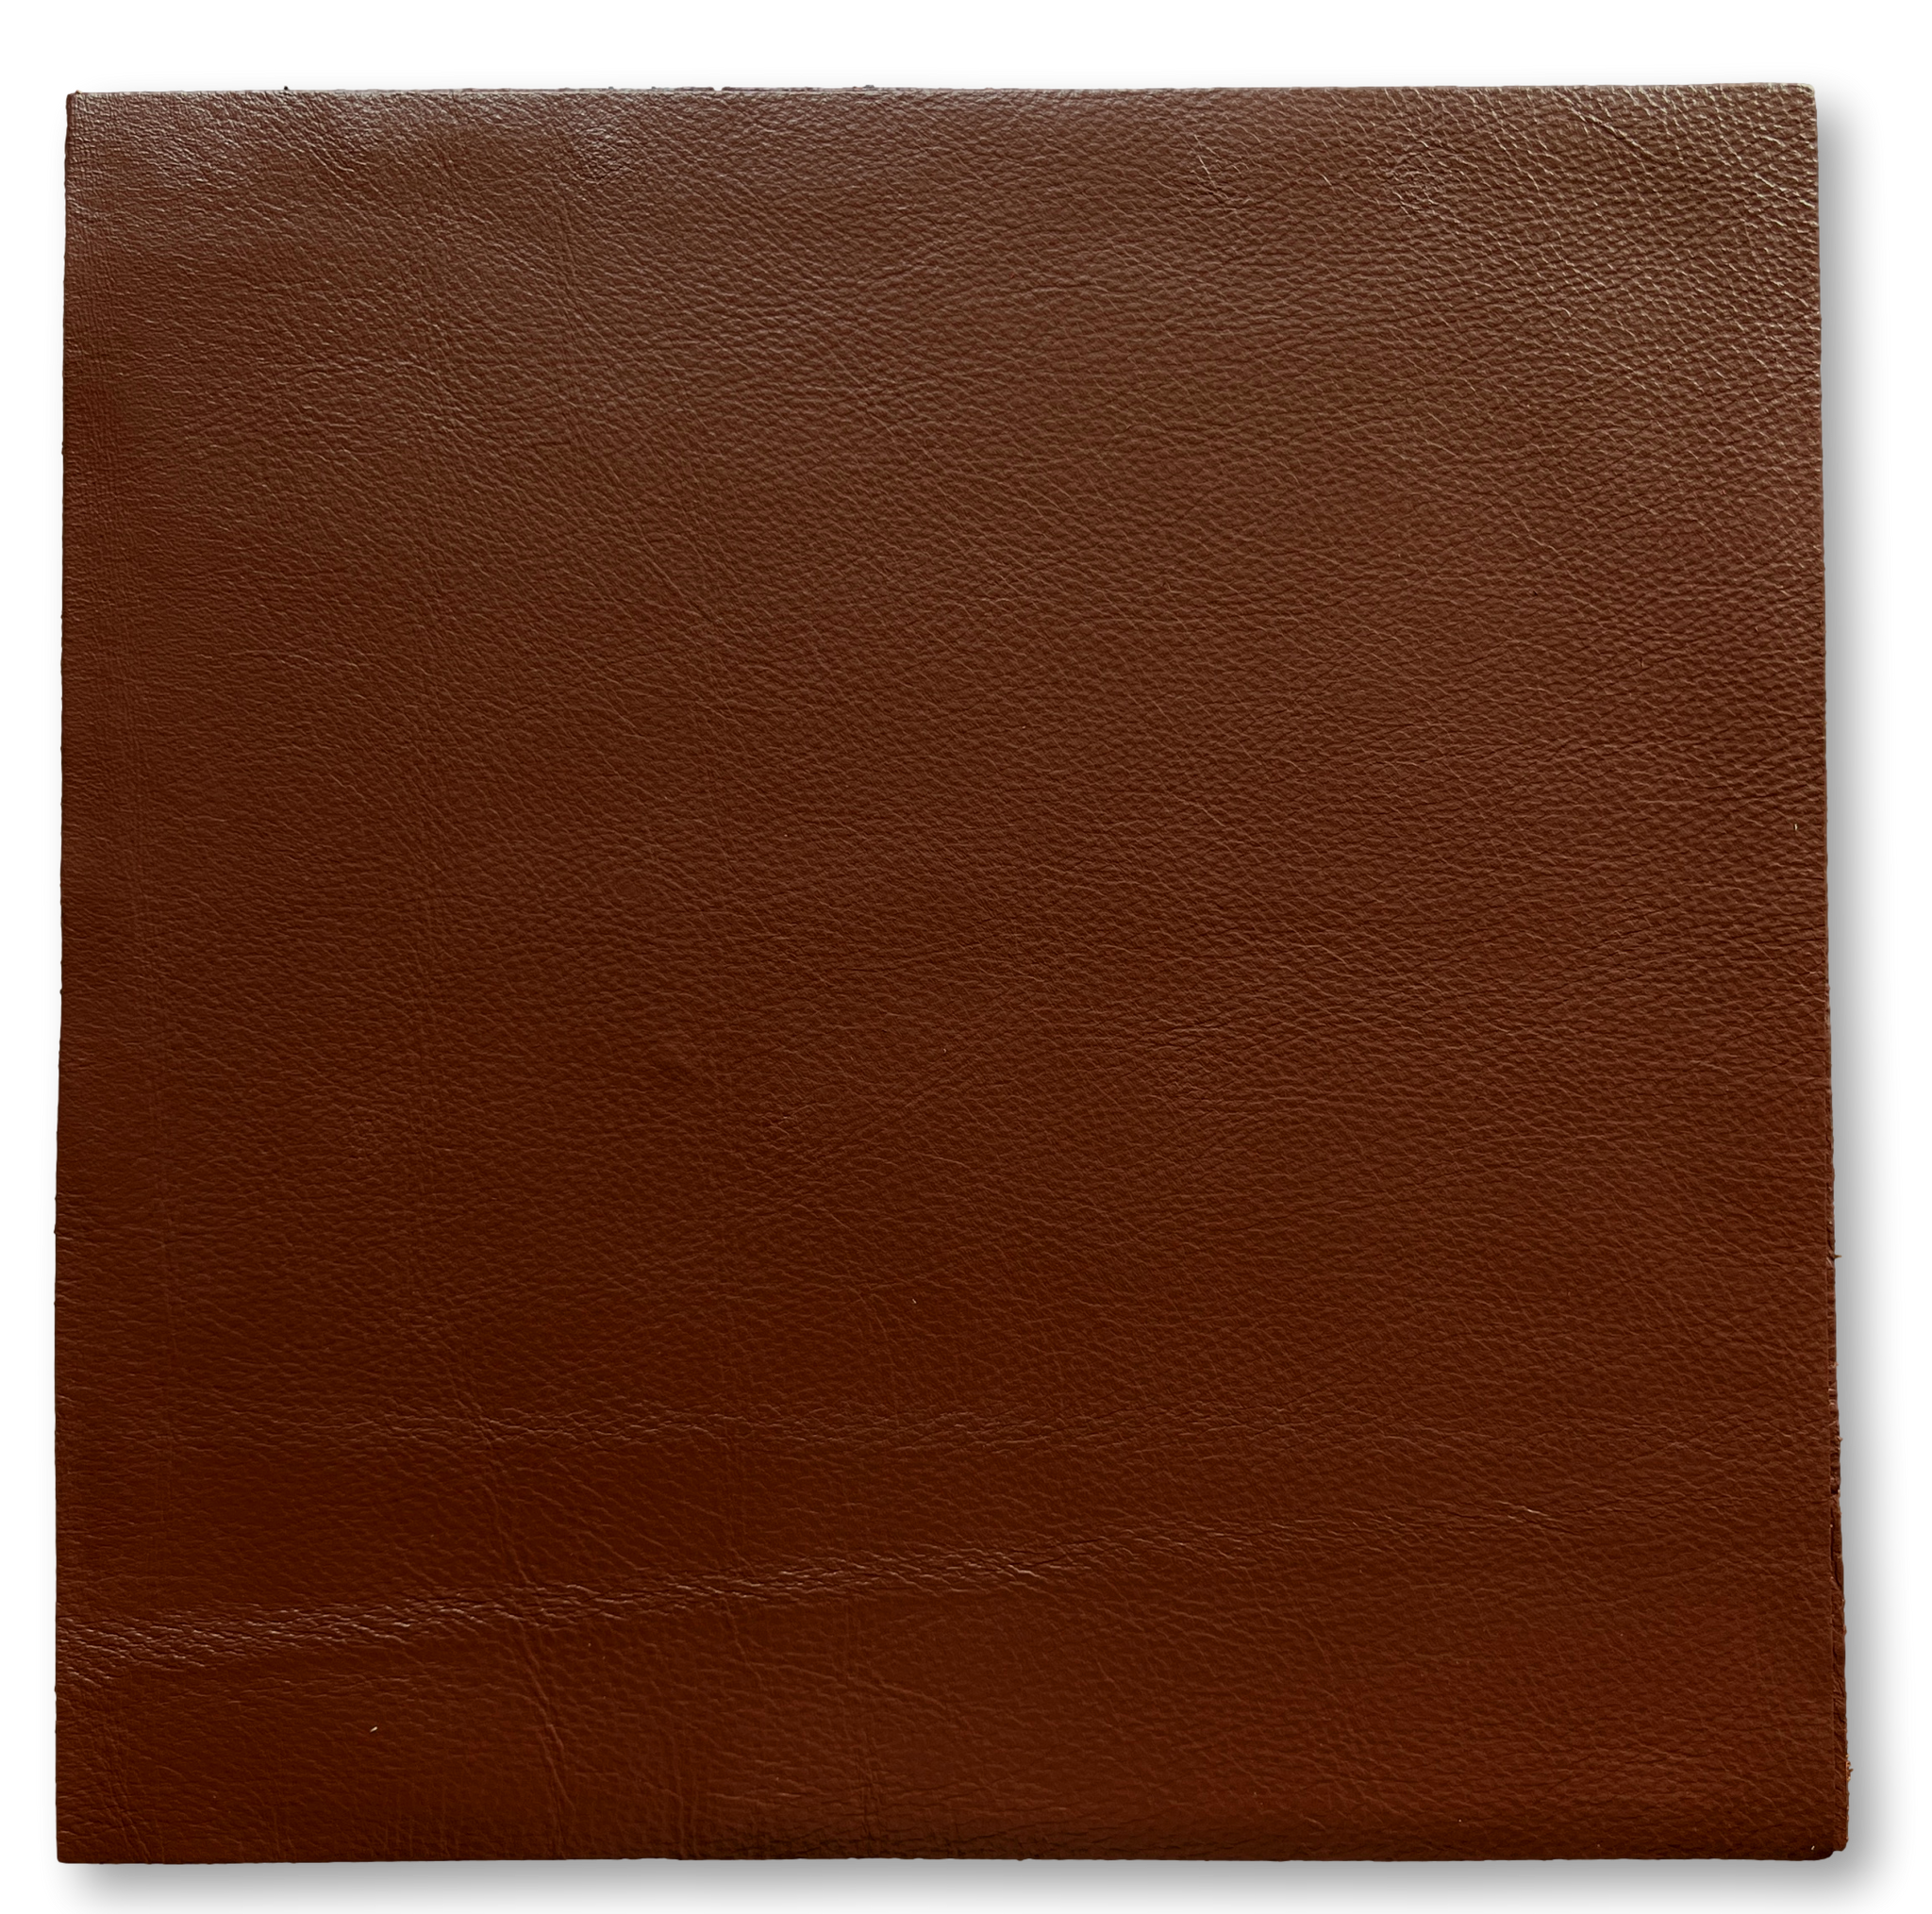 Brandy Cowhide Leather: 12" x 12" Pre-Cut Leather Pieces